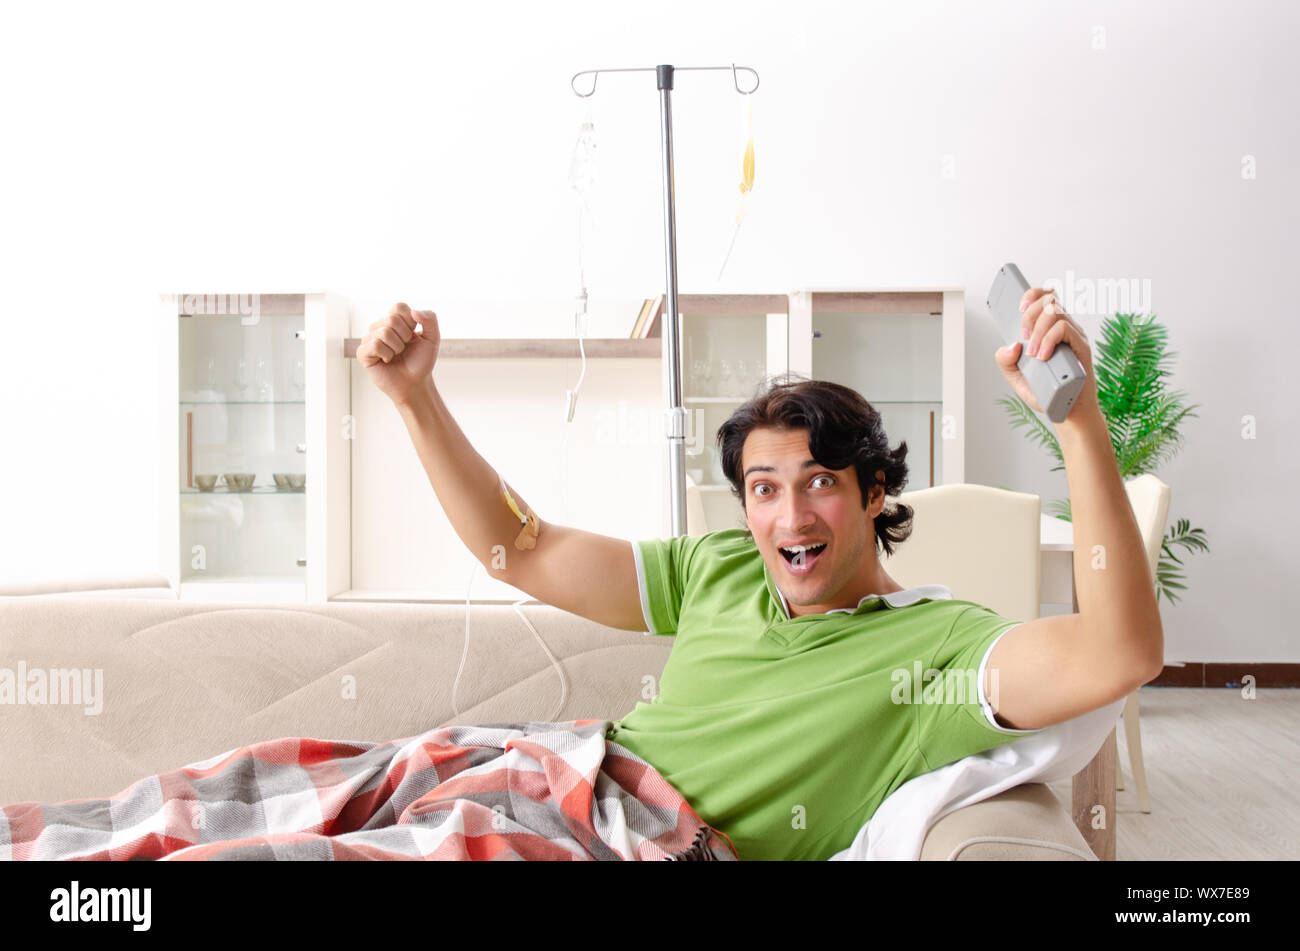 Young man suffering at home Stock Photo